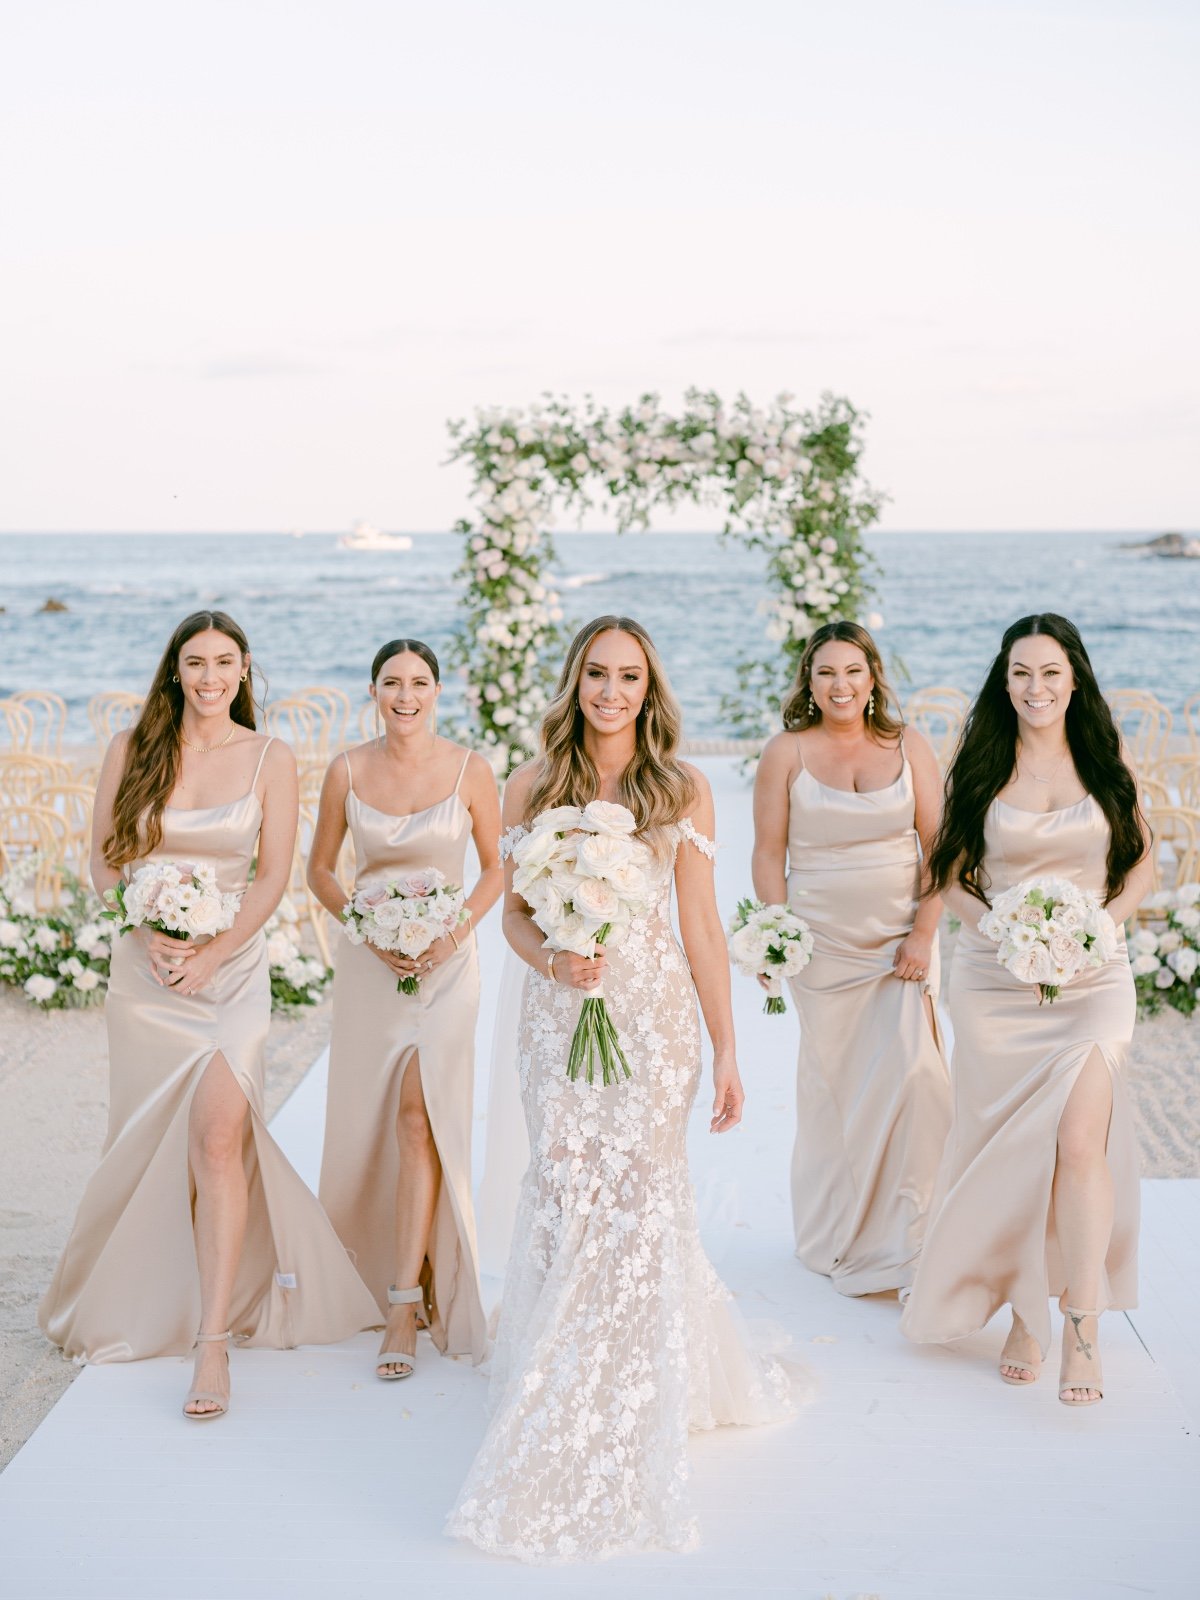 Bride and bridesmaids in champagne dresses in front of ceremony arch